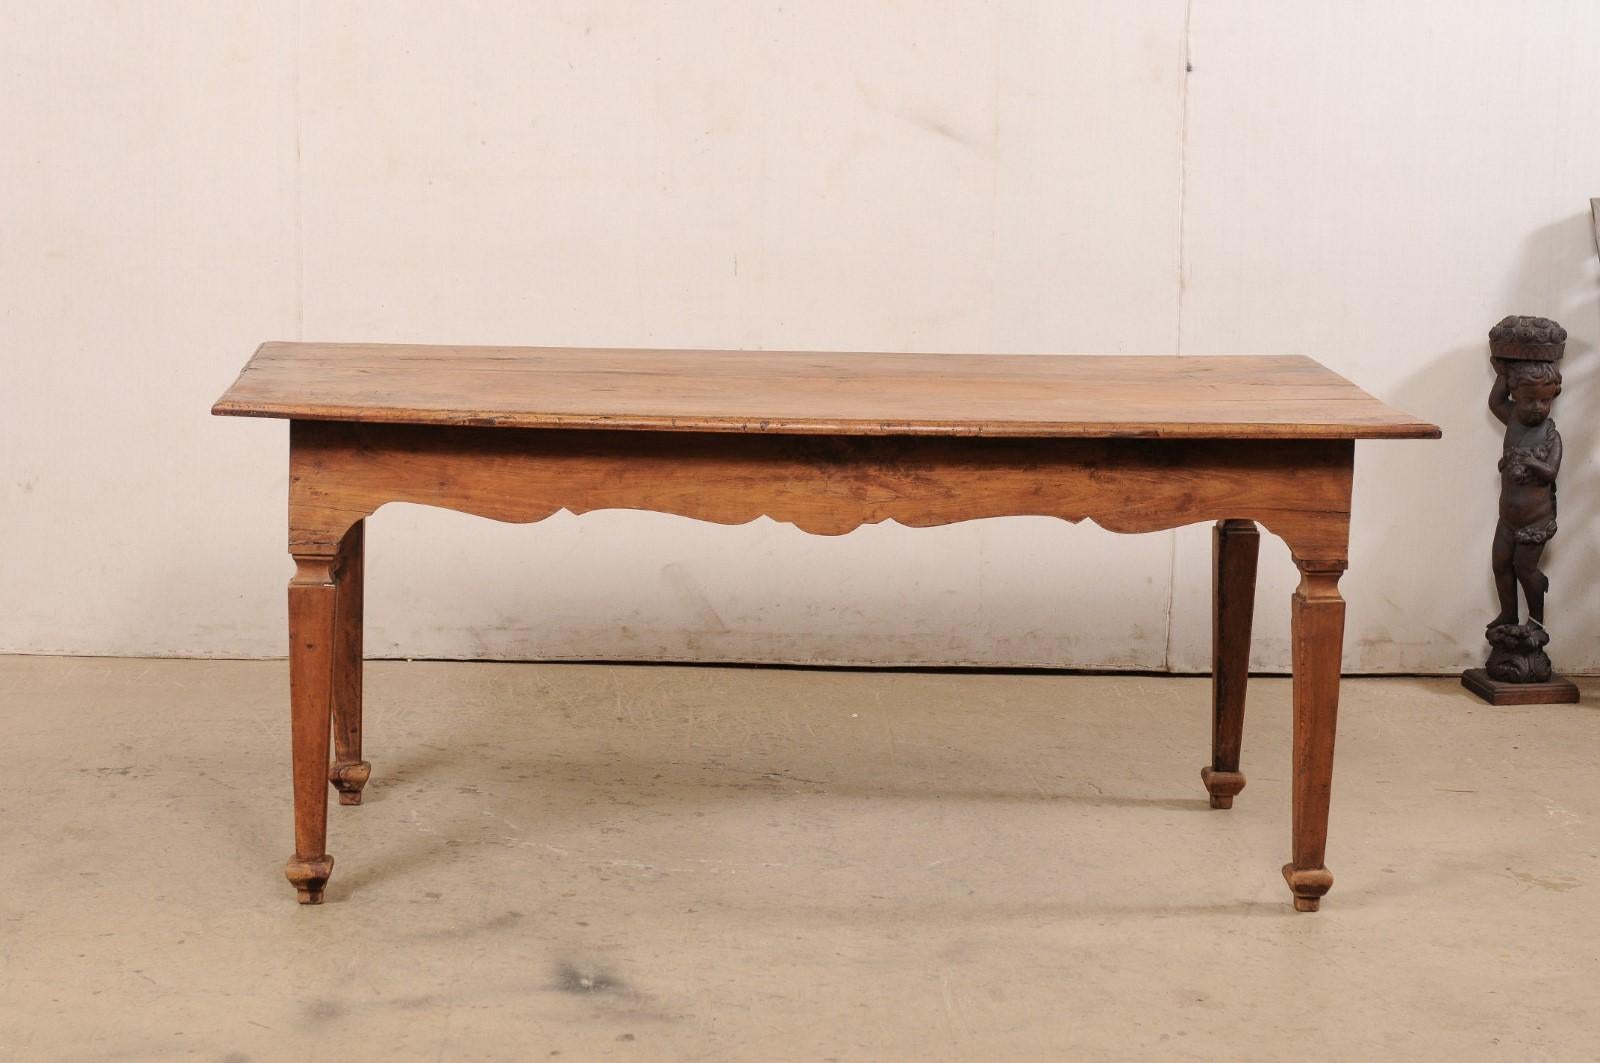 A Late 18th C. Italian Walnut Farm Table with Carved Skirt, 6 Ft Long For Sale 3